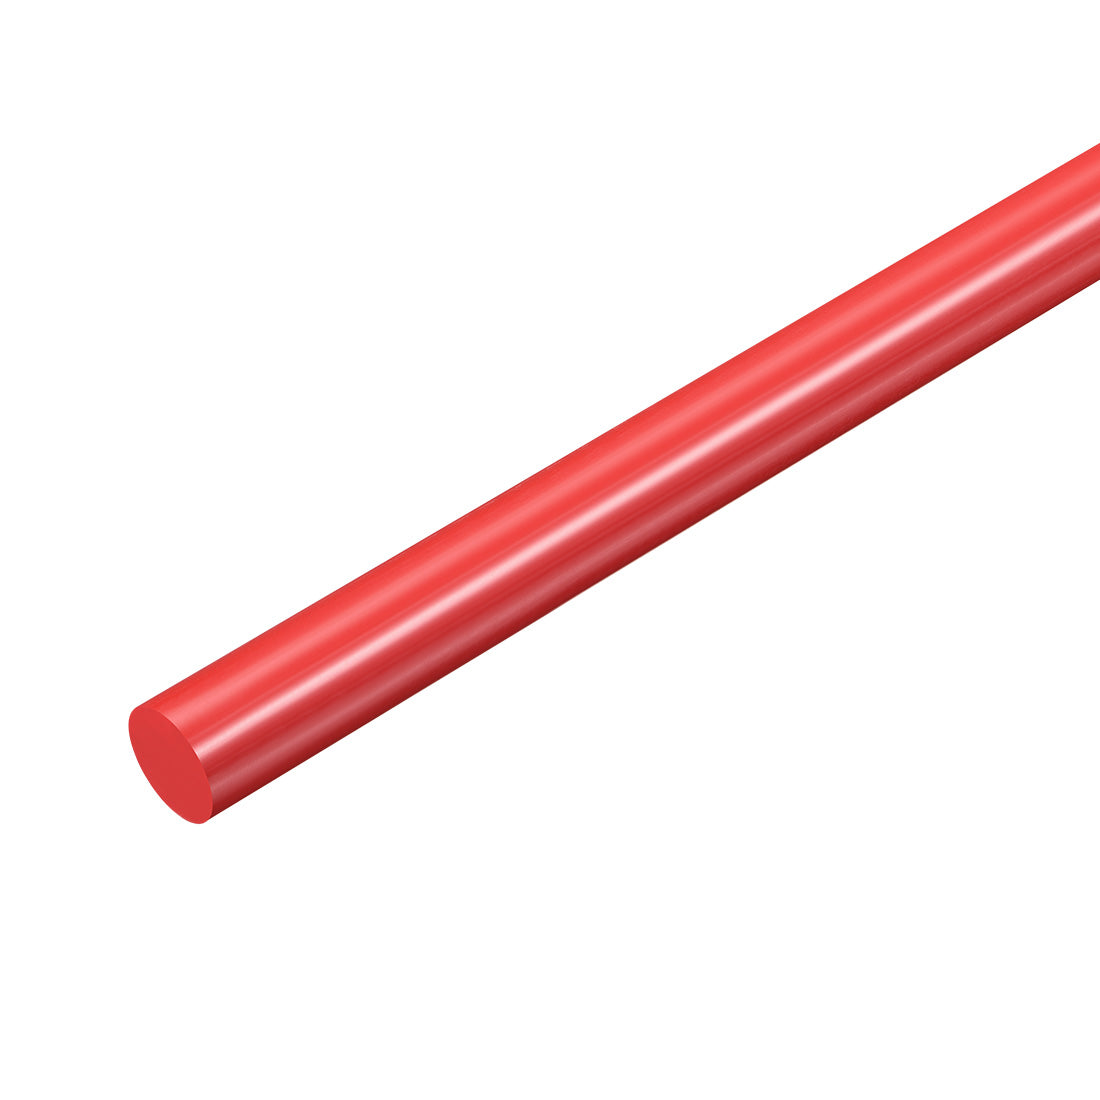 uxcell Uxcell Plastic Round Rod,8mm Dia 50cm Red Engineering Plastic Round Bar